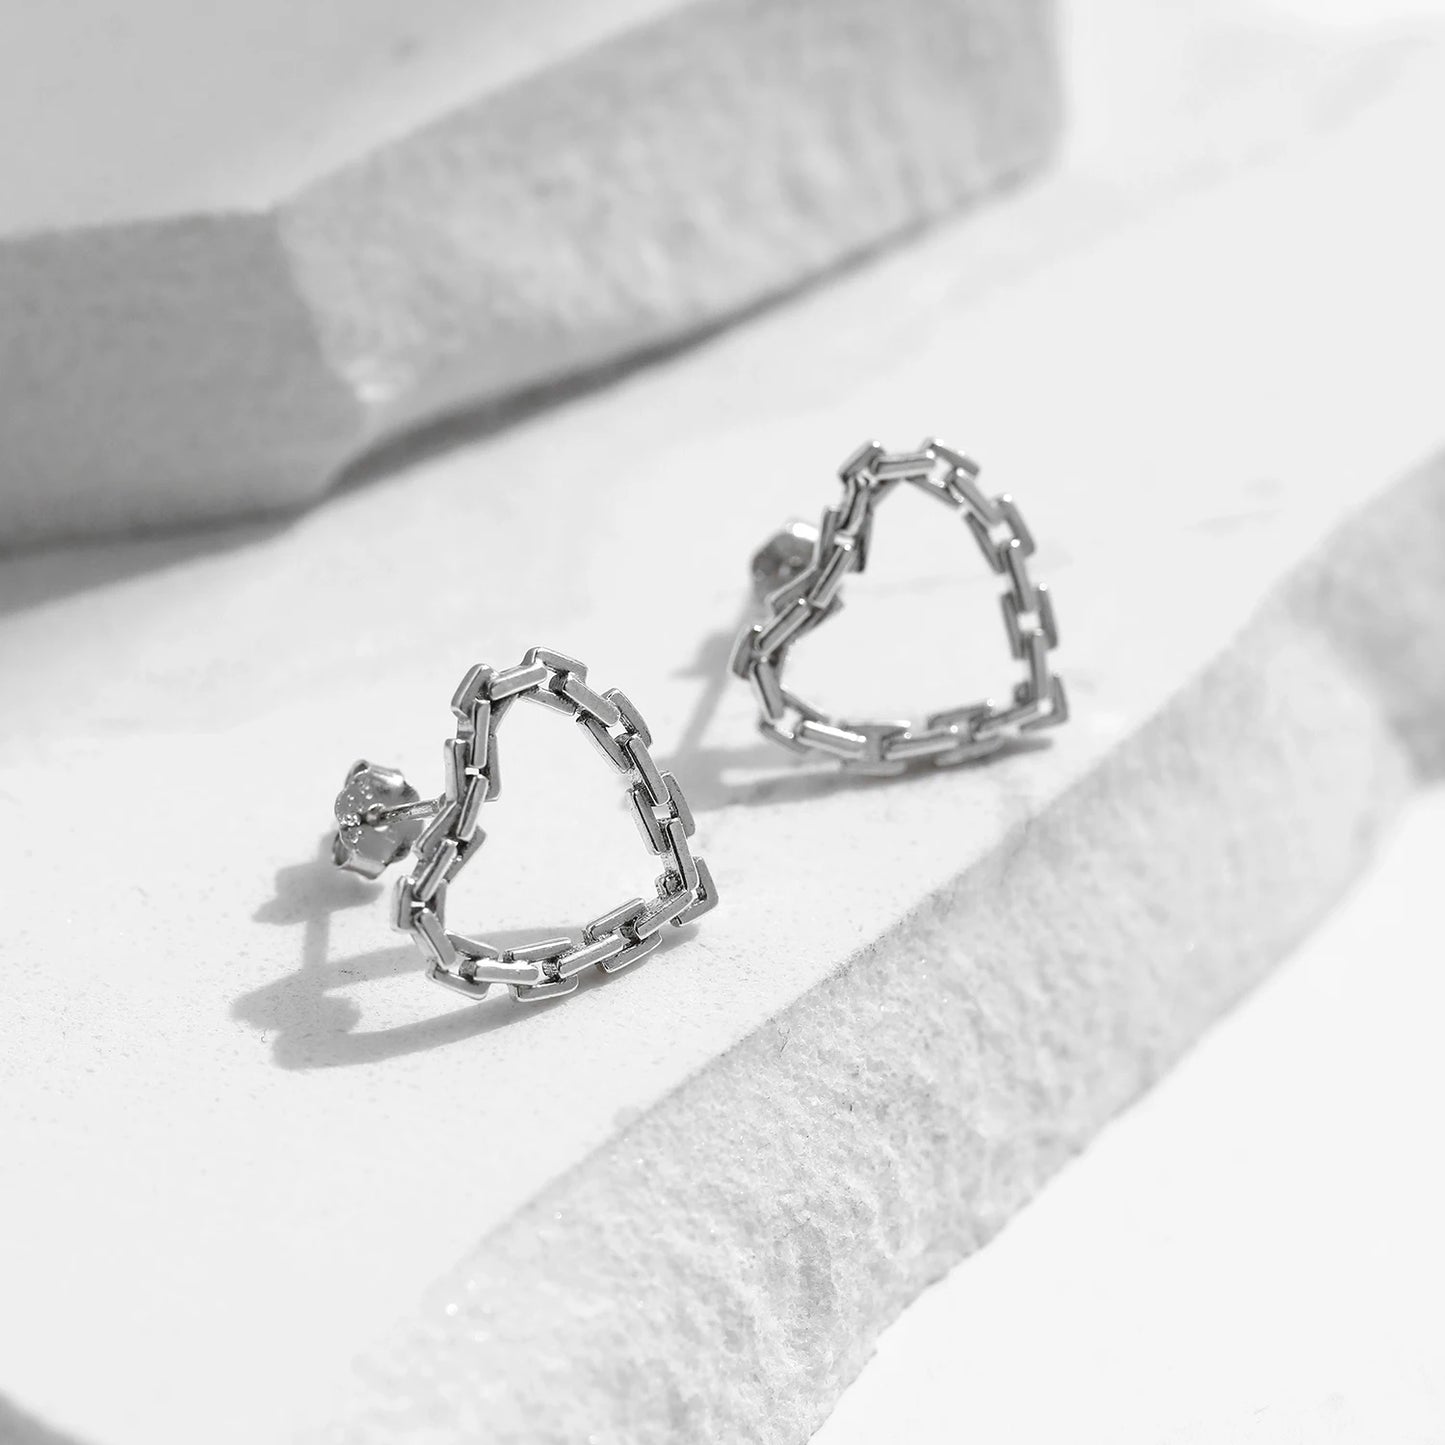 Sparkle with MQ 925 Silver Hearts Earrings - Perfect for Women!